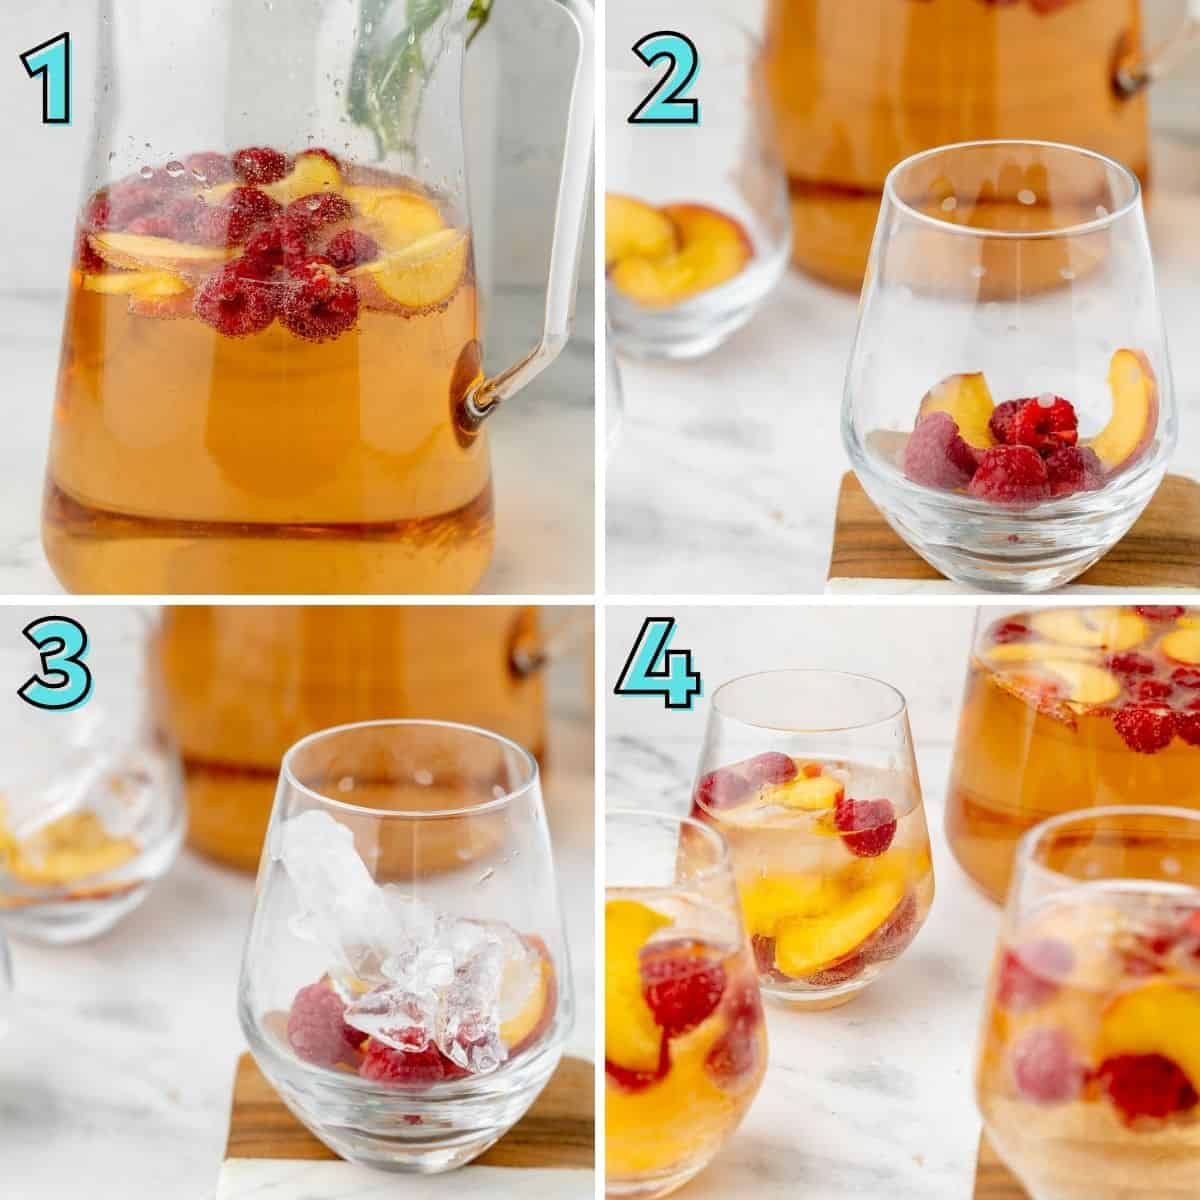 Step by step instructions to prepare rose peach sangria, in a collage.